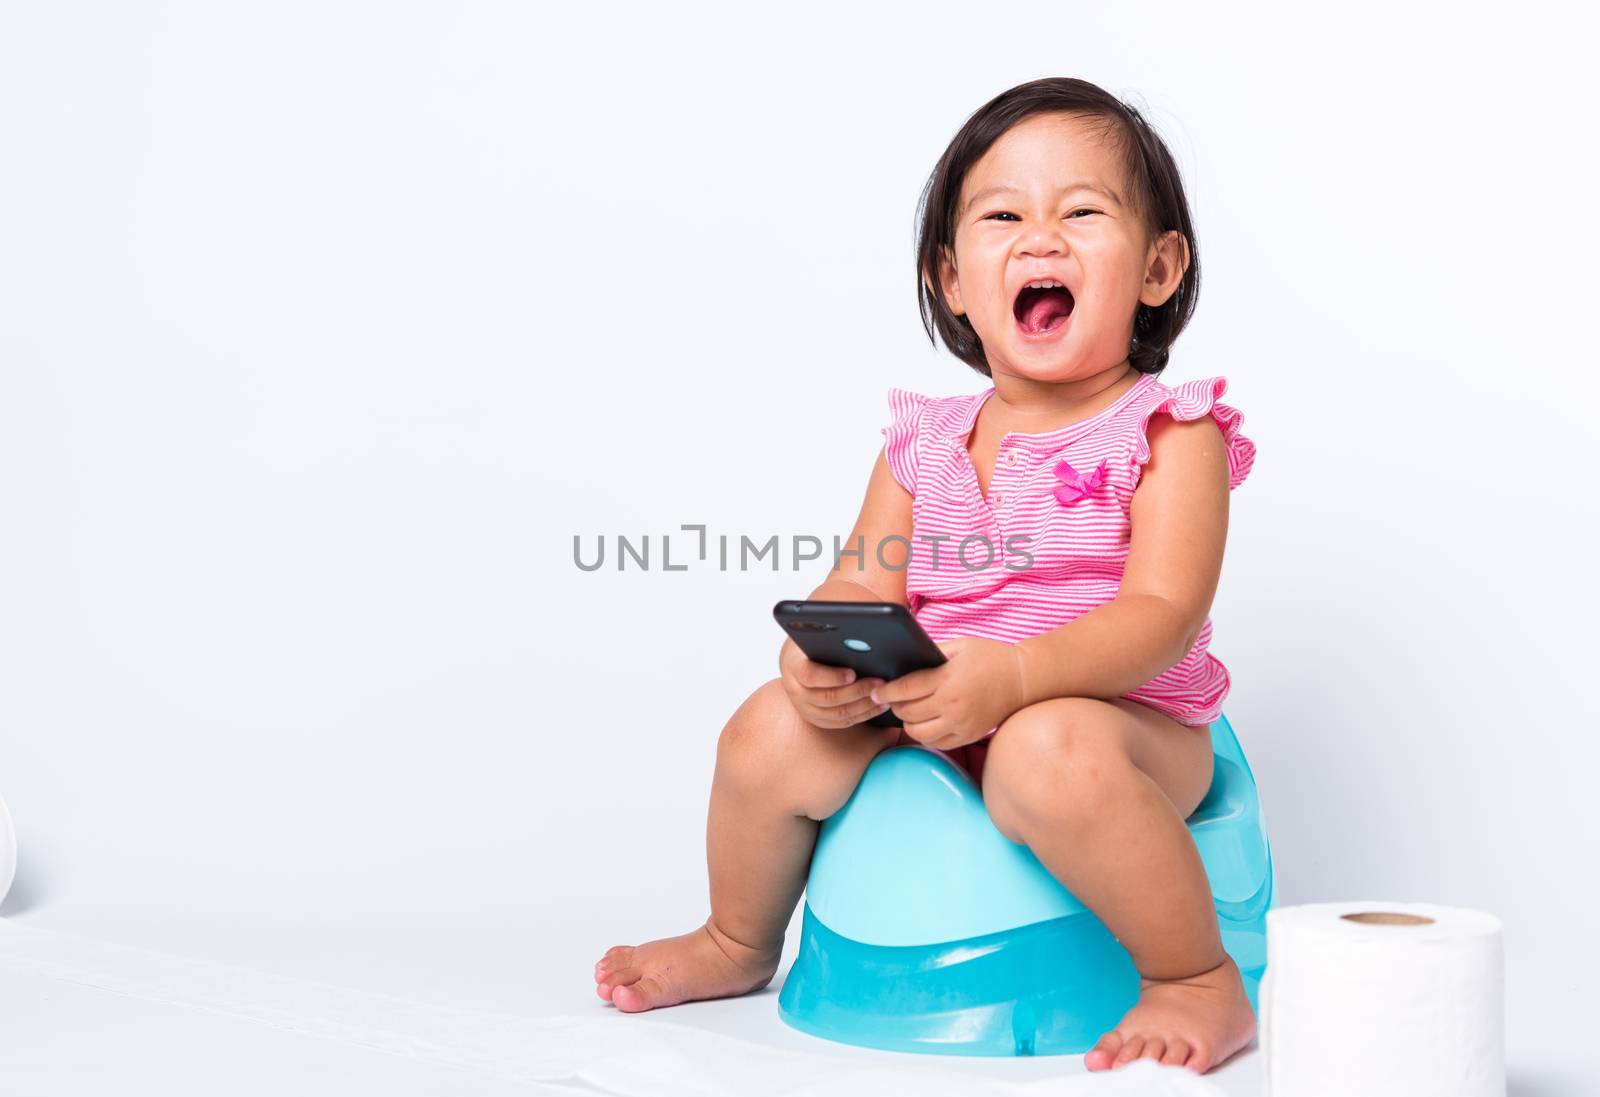 Asian little cute baby child girl education training to sitting on blue chamber pot or potty and play smart mobile phone with toilet paper rolls, studio shot isolated on white background, wc toilet